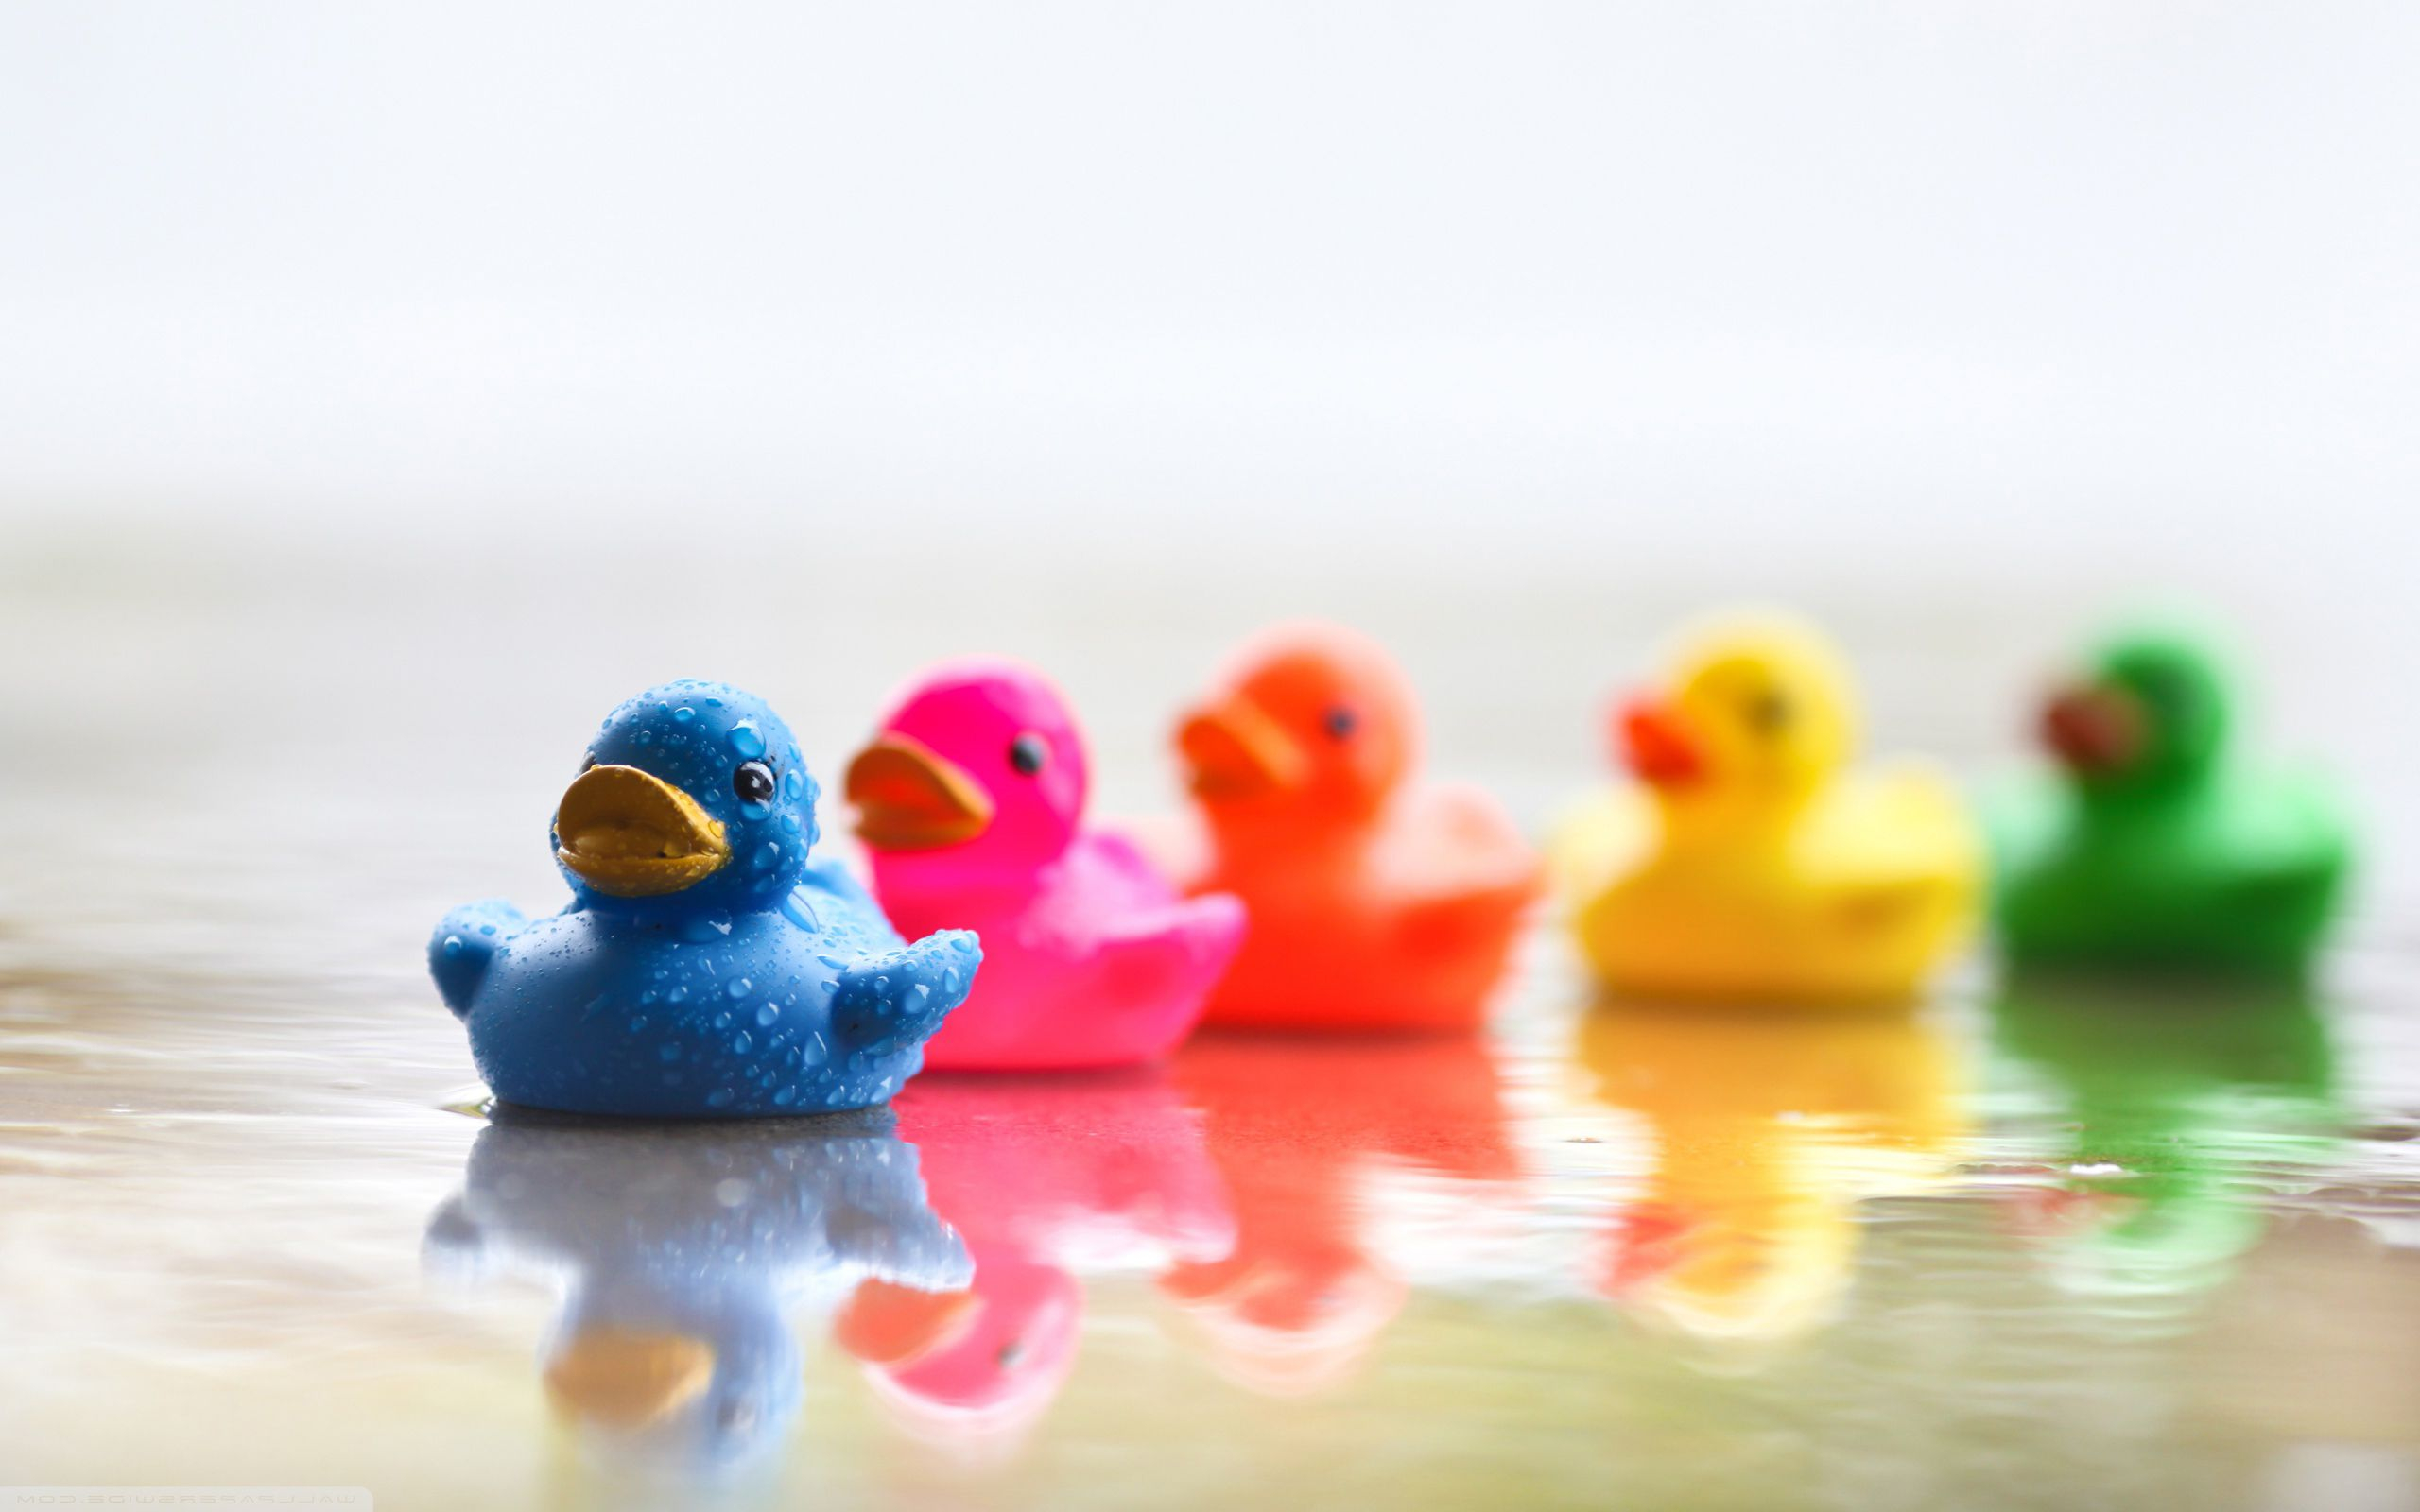 2560x1600 colorful ducks playing follow the leader | Duck wallpaper, Rubber duck, Cute wallpapers